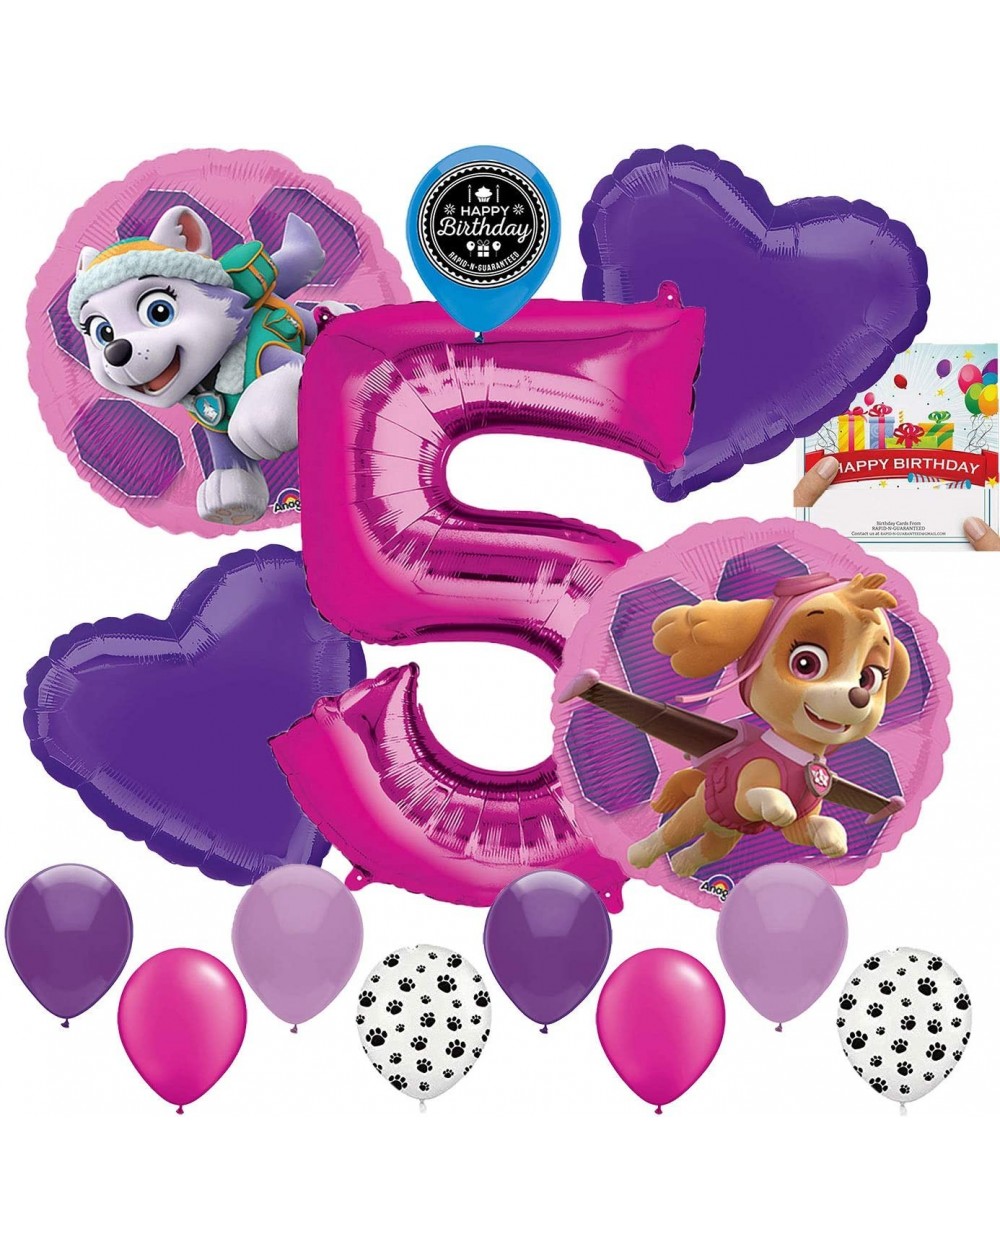 Balloons Paw Patrol Party Supplies Girls Balloon Decoration Bundle for 5th Birthday - C319298RKZK $13.55